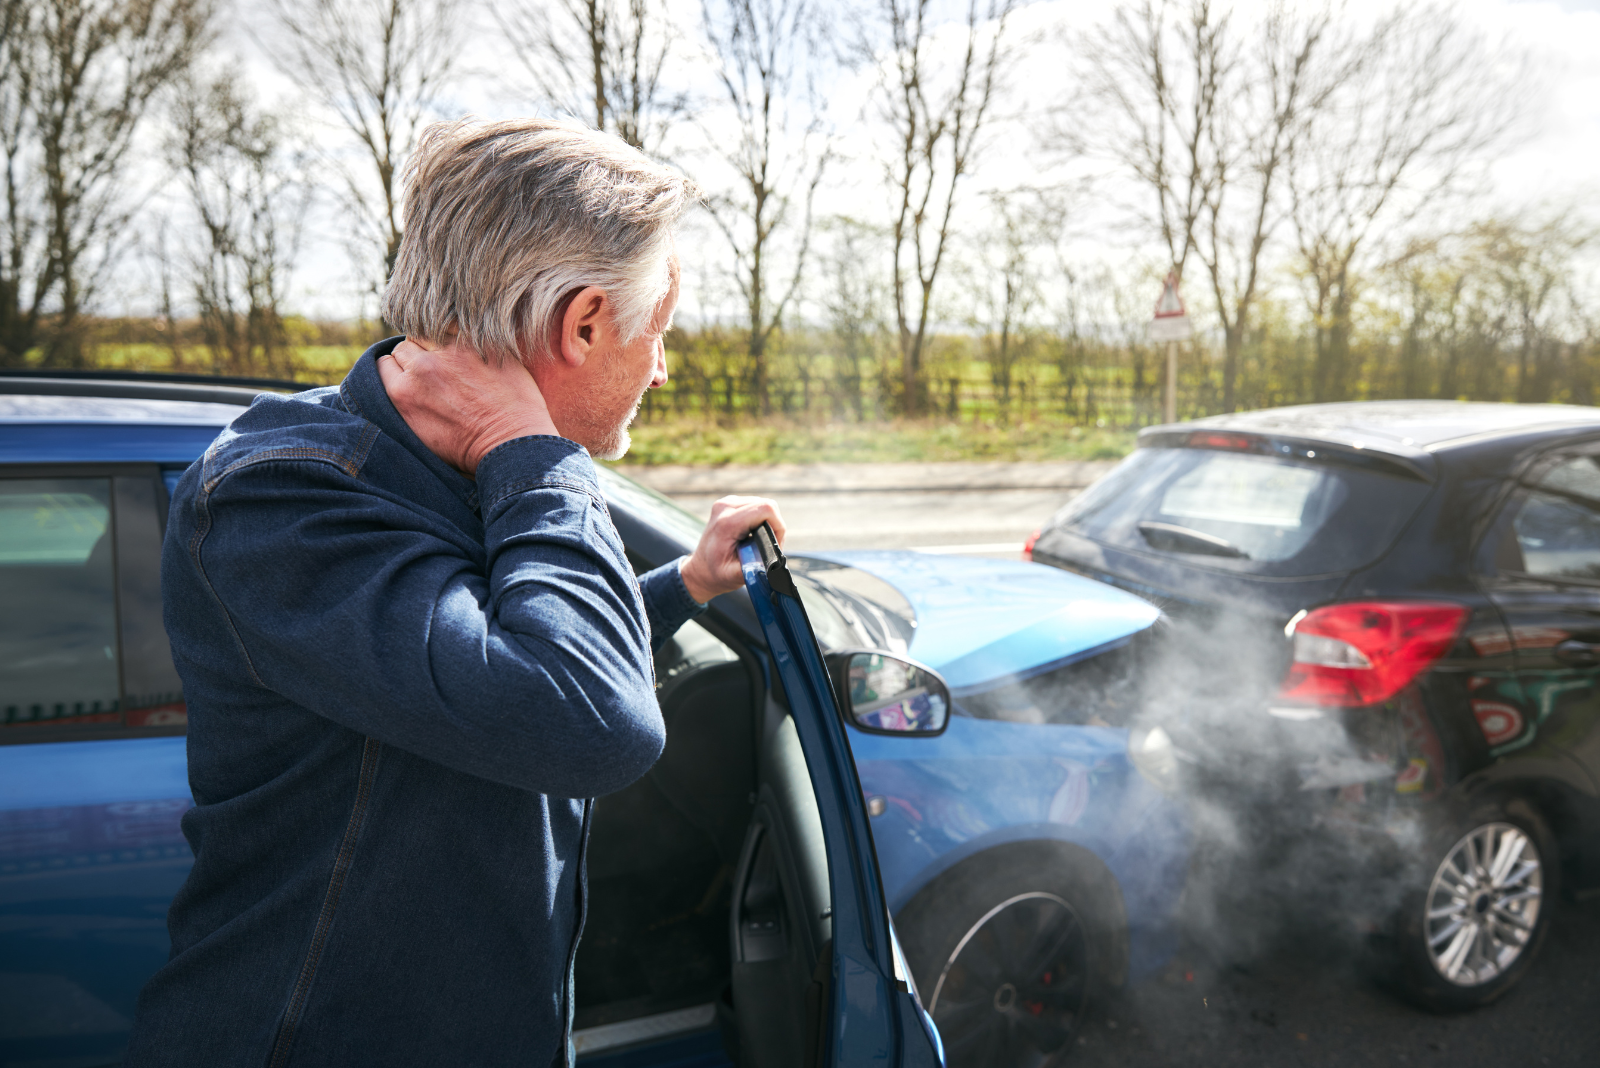 To Sue or Not to Sue: Your Options After a Car Accident